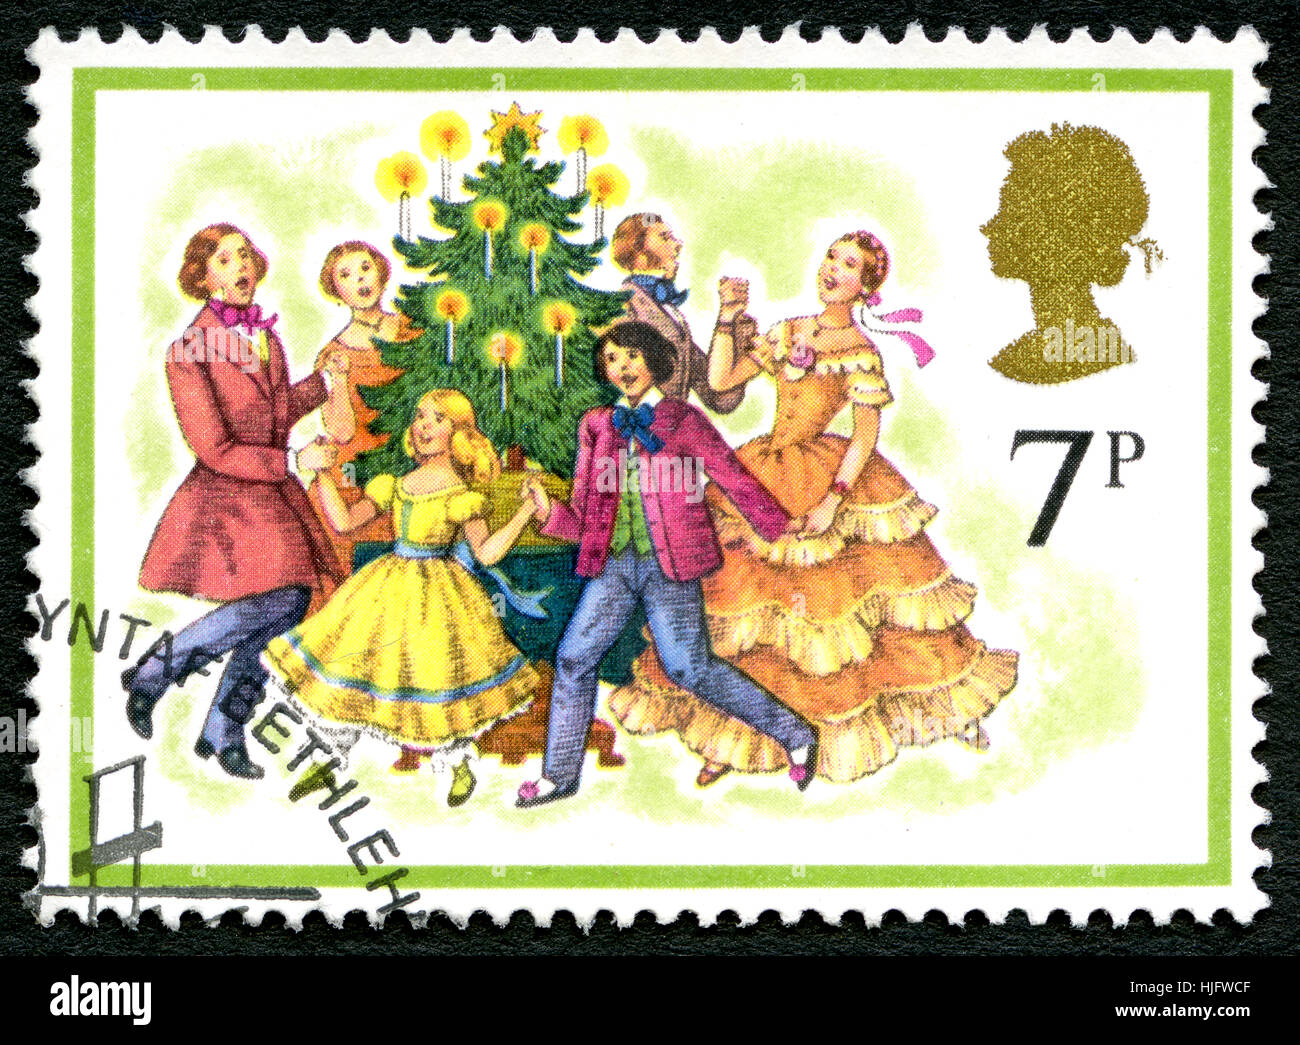 UK - CIRCA 1980s: A postage stamp from the UK - a festive and happy Christmas scene of a family dancing around the Xmas tree. Stock Photo